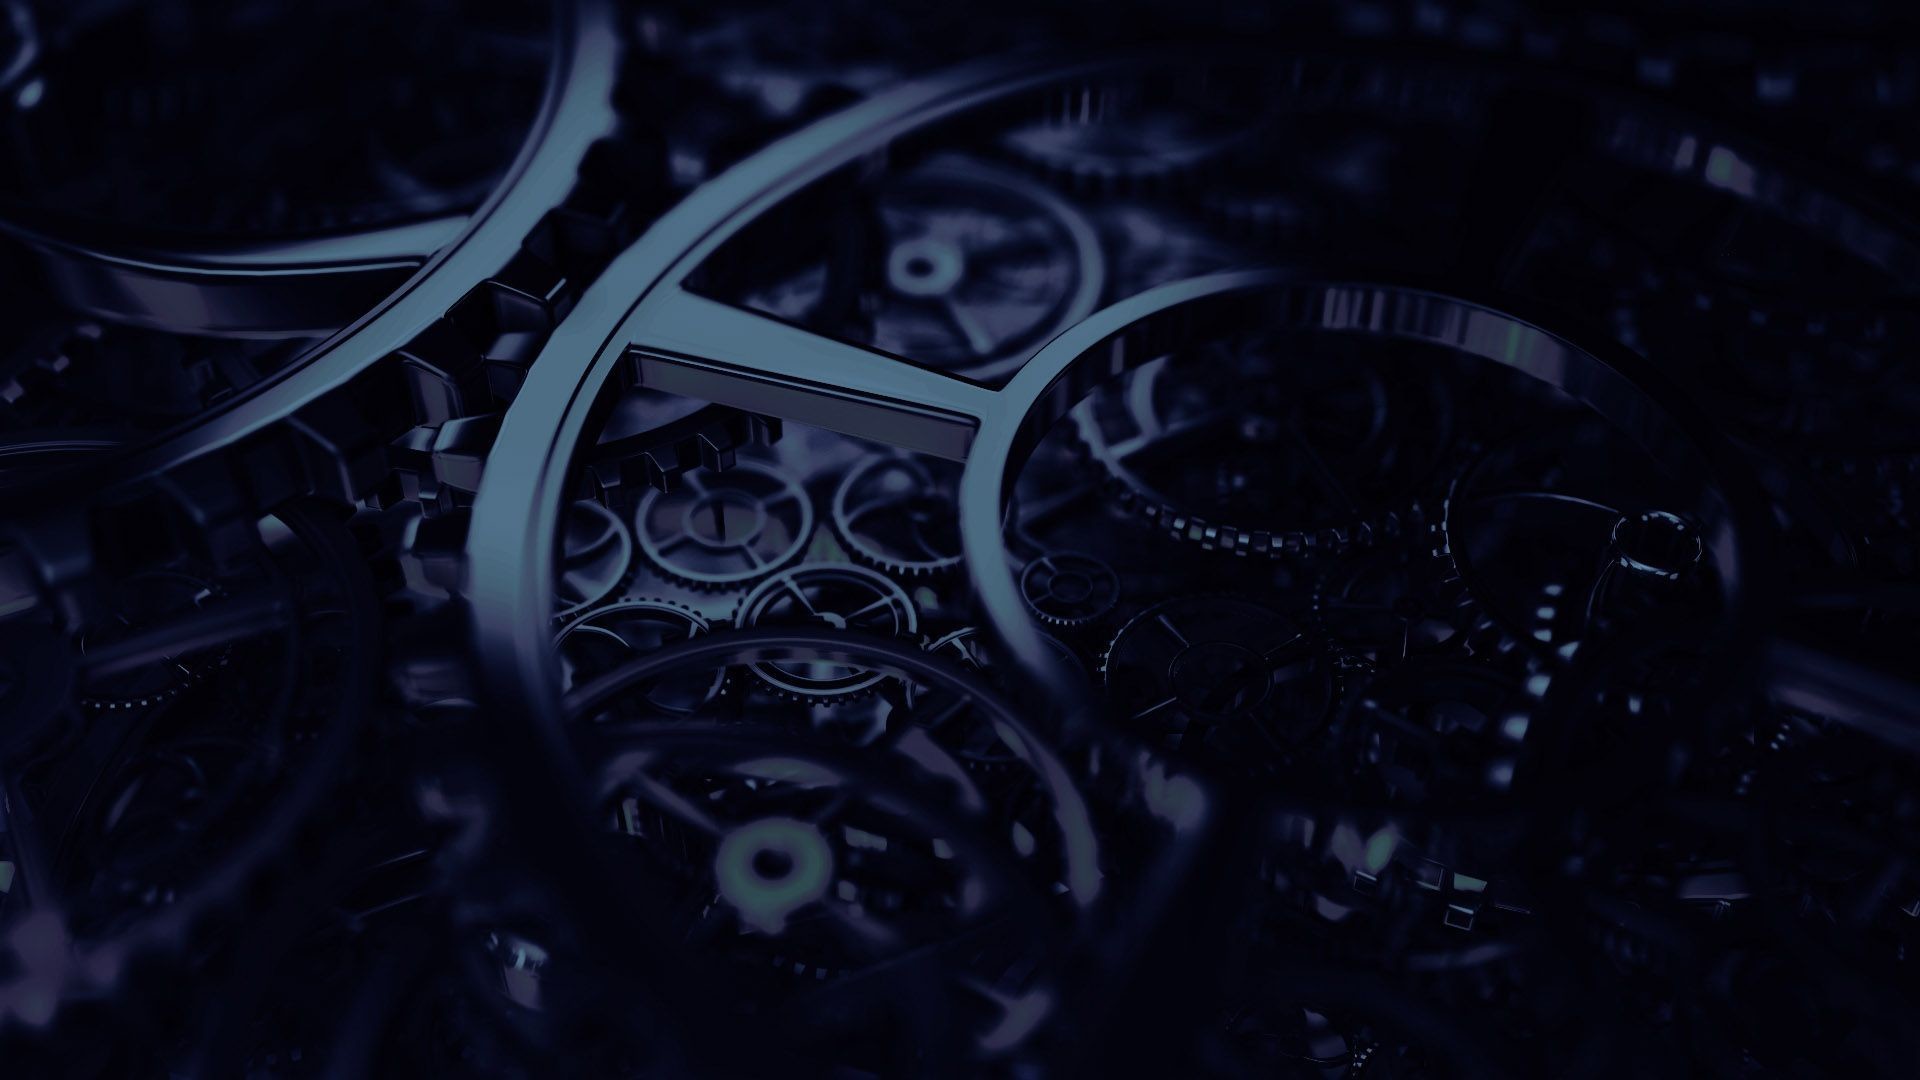 Steampunk Gears Wallpaper (75+ images)